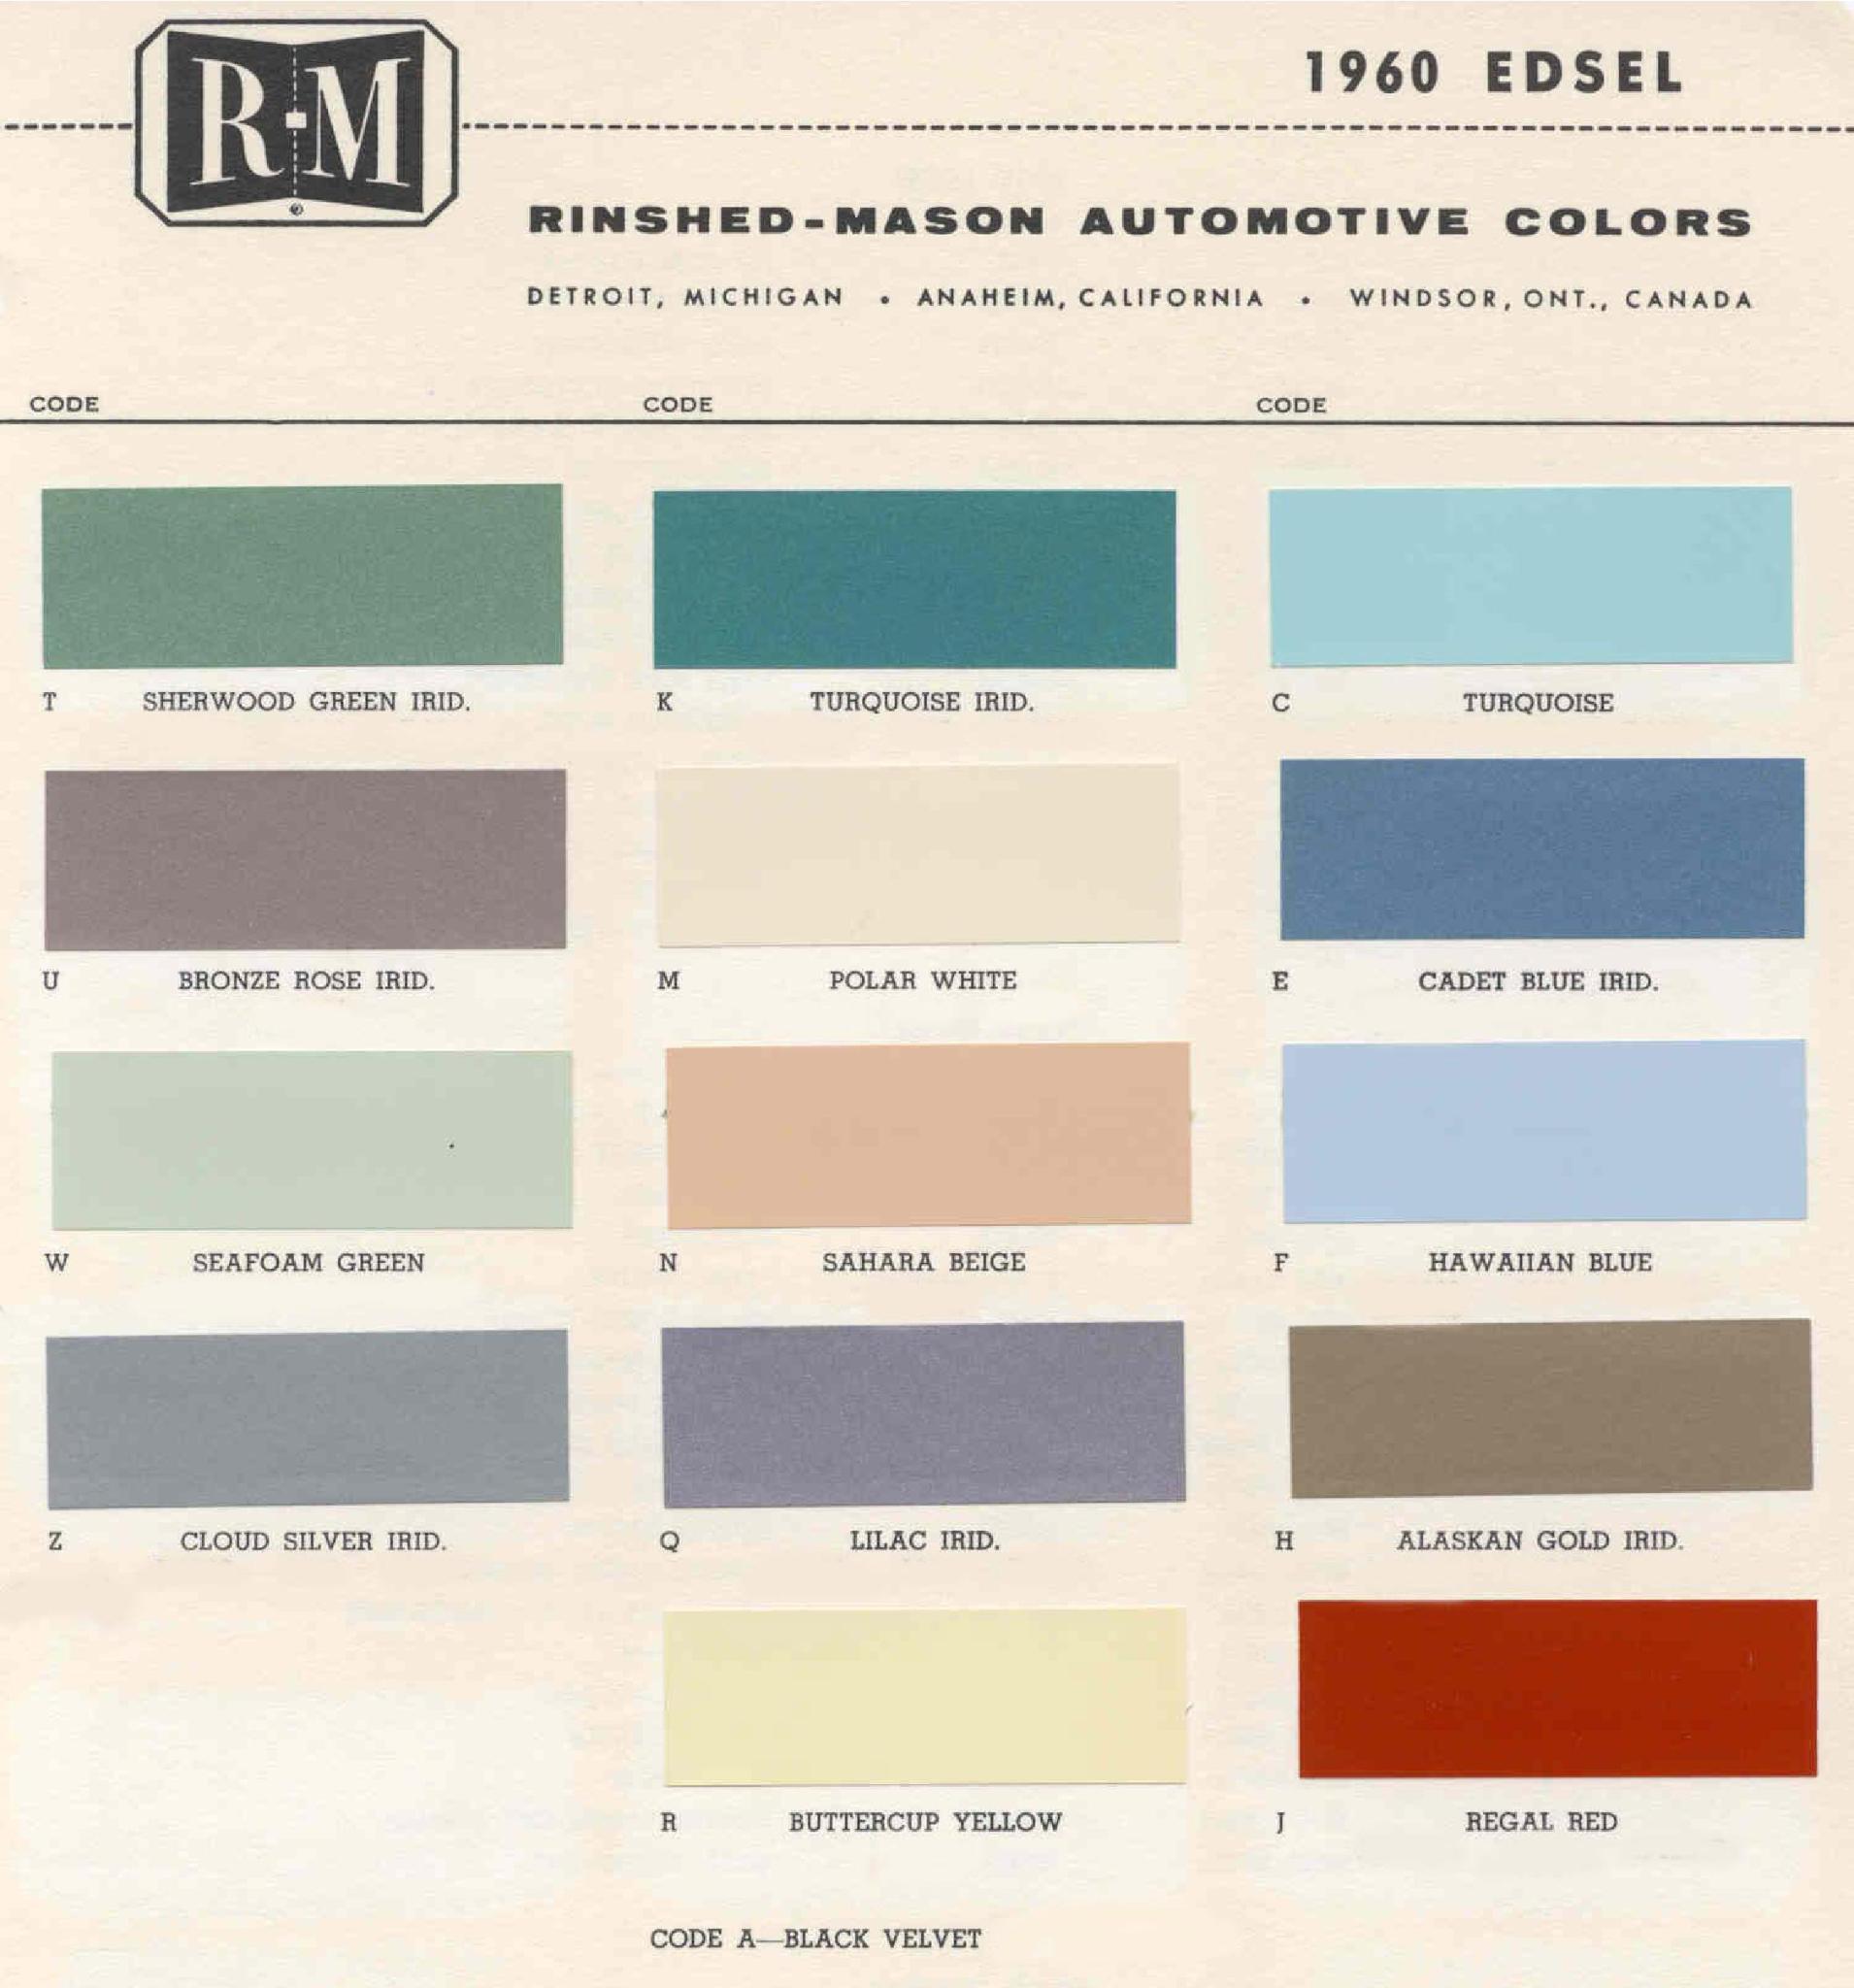 Ford Edsel 1960 Color Code, Paint Chart